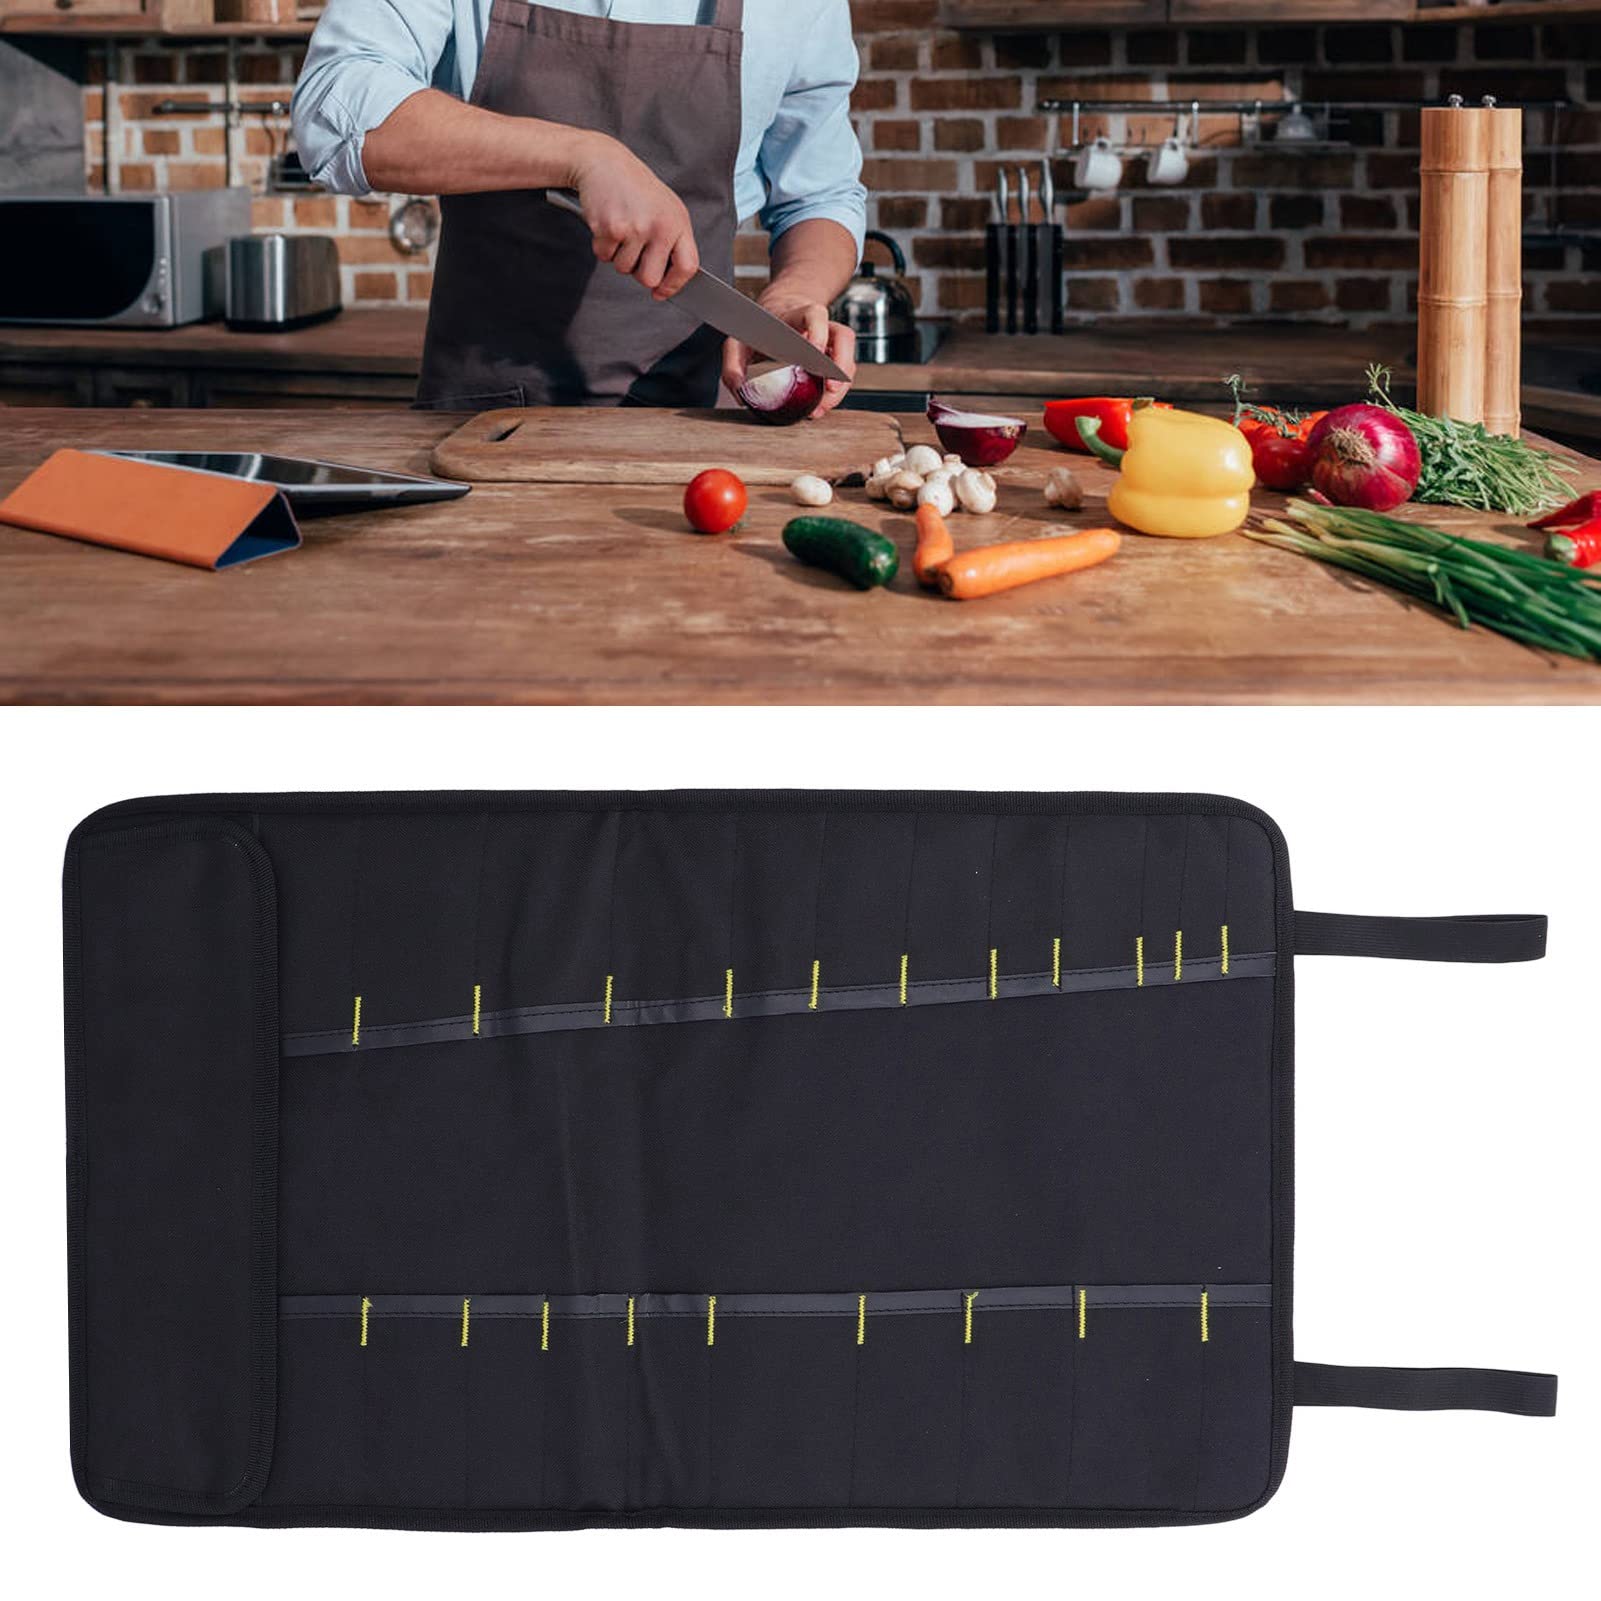 Acouto Chef Knife Roll Bag, Foldable Oxford Cloth Cutter Carrying Bag Knife Cutlery Carrier Portable Knife Pouch Holders Cases for Restaurant Hotle Home Camping BBQ